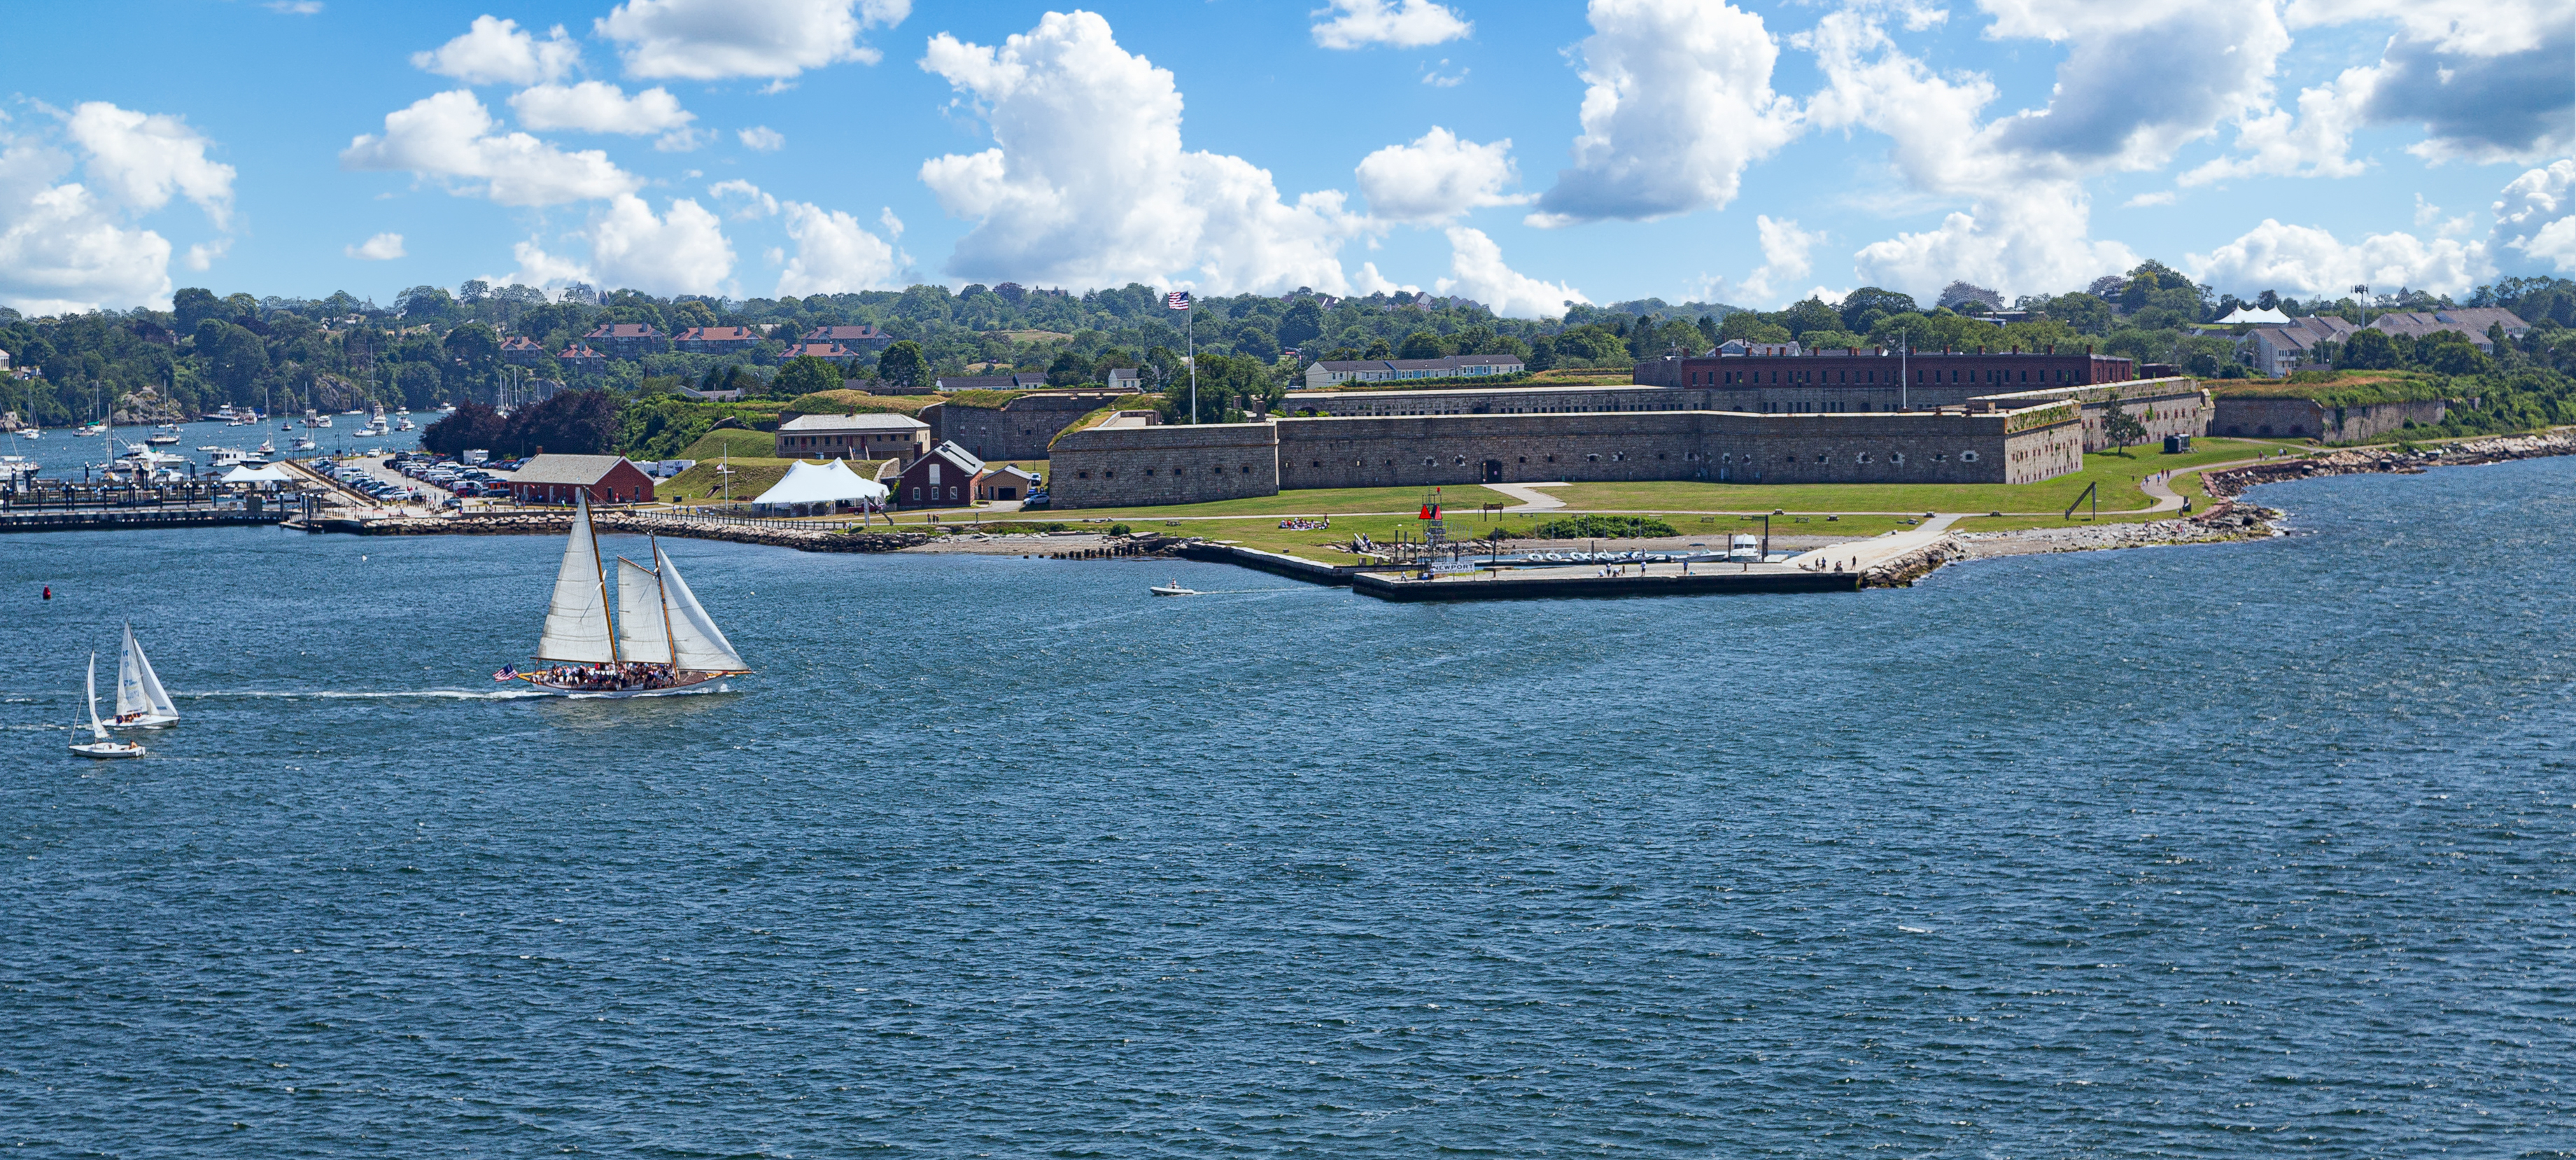 https://res.cloudinary.com/see-sight-tours/image/upload/v1581436367/fort-adams.jpg